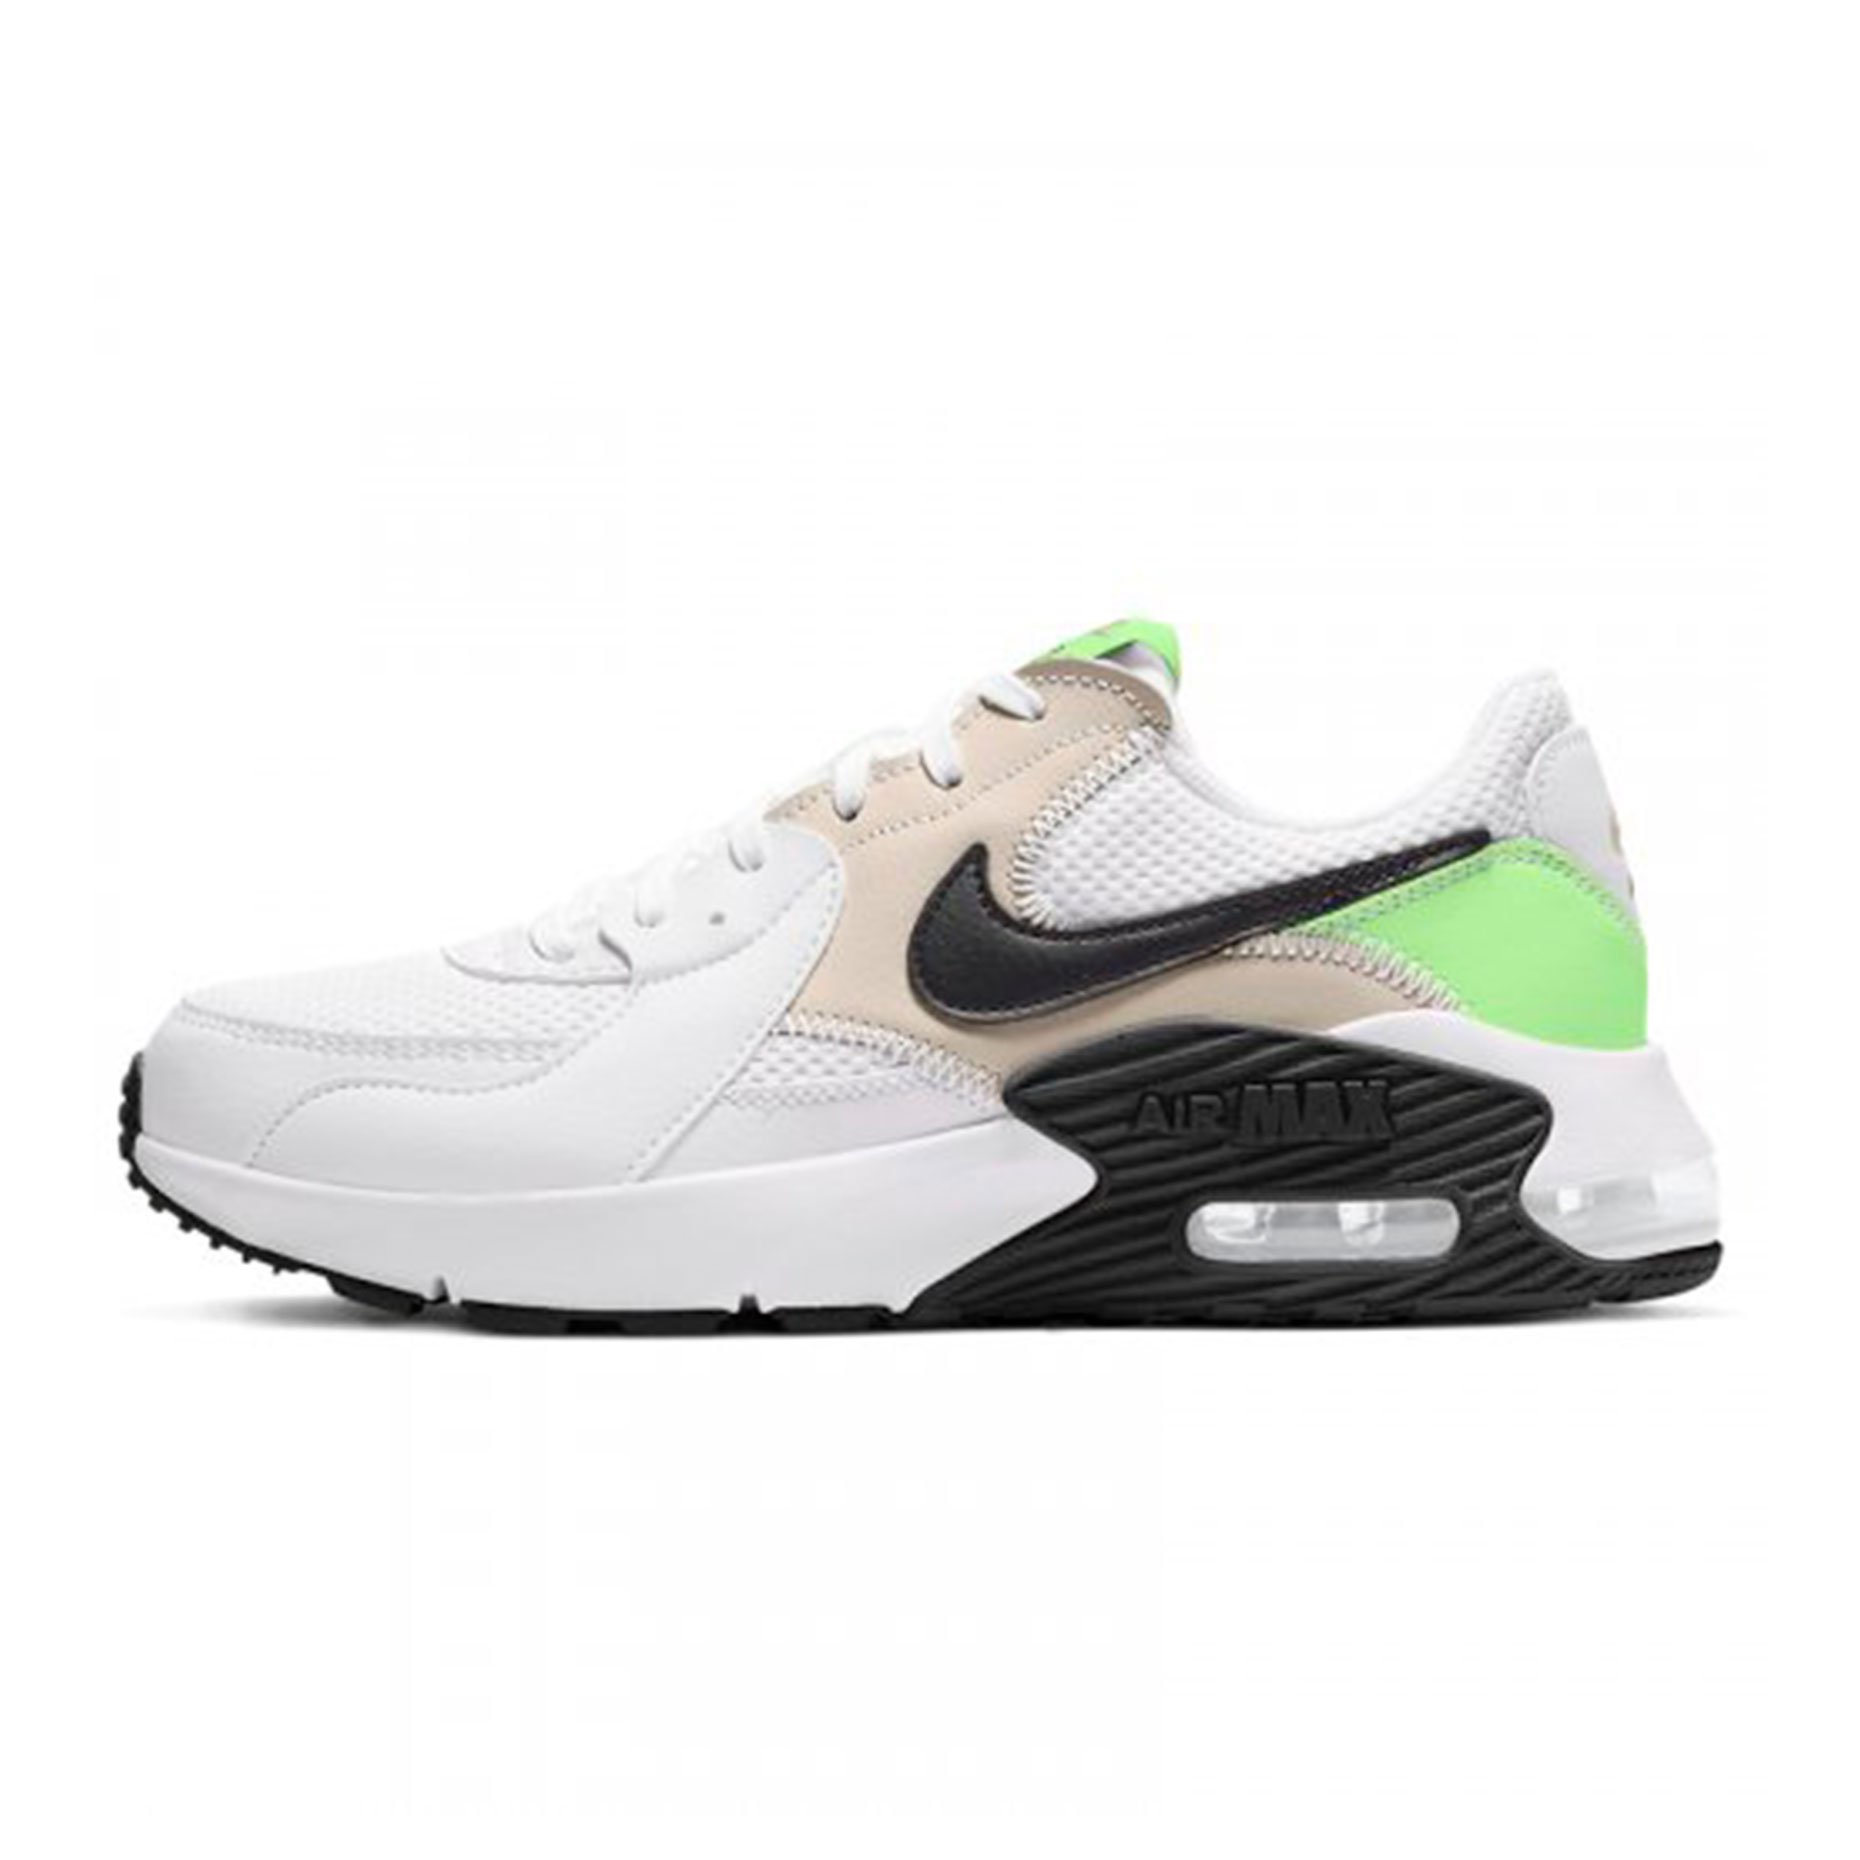 Кроссовки женские Nike Air Max Excee